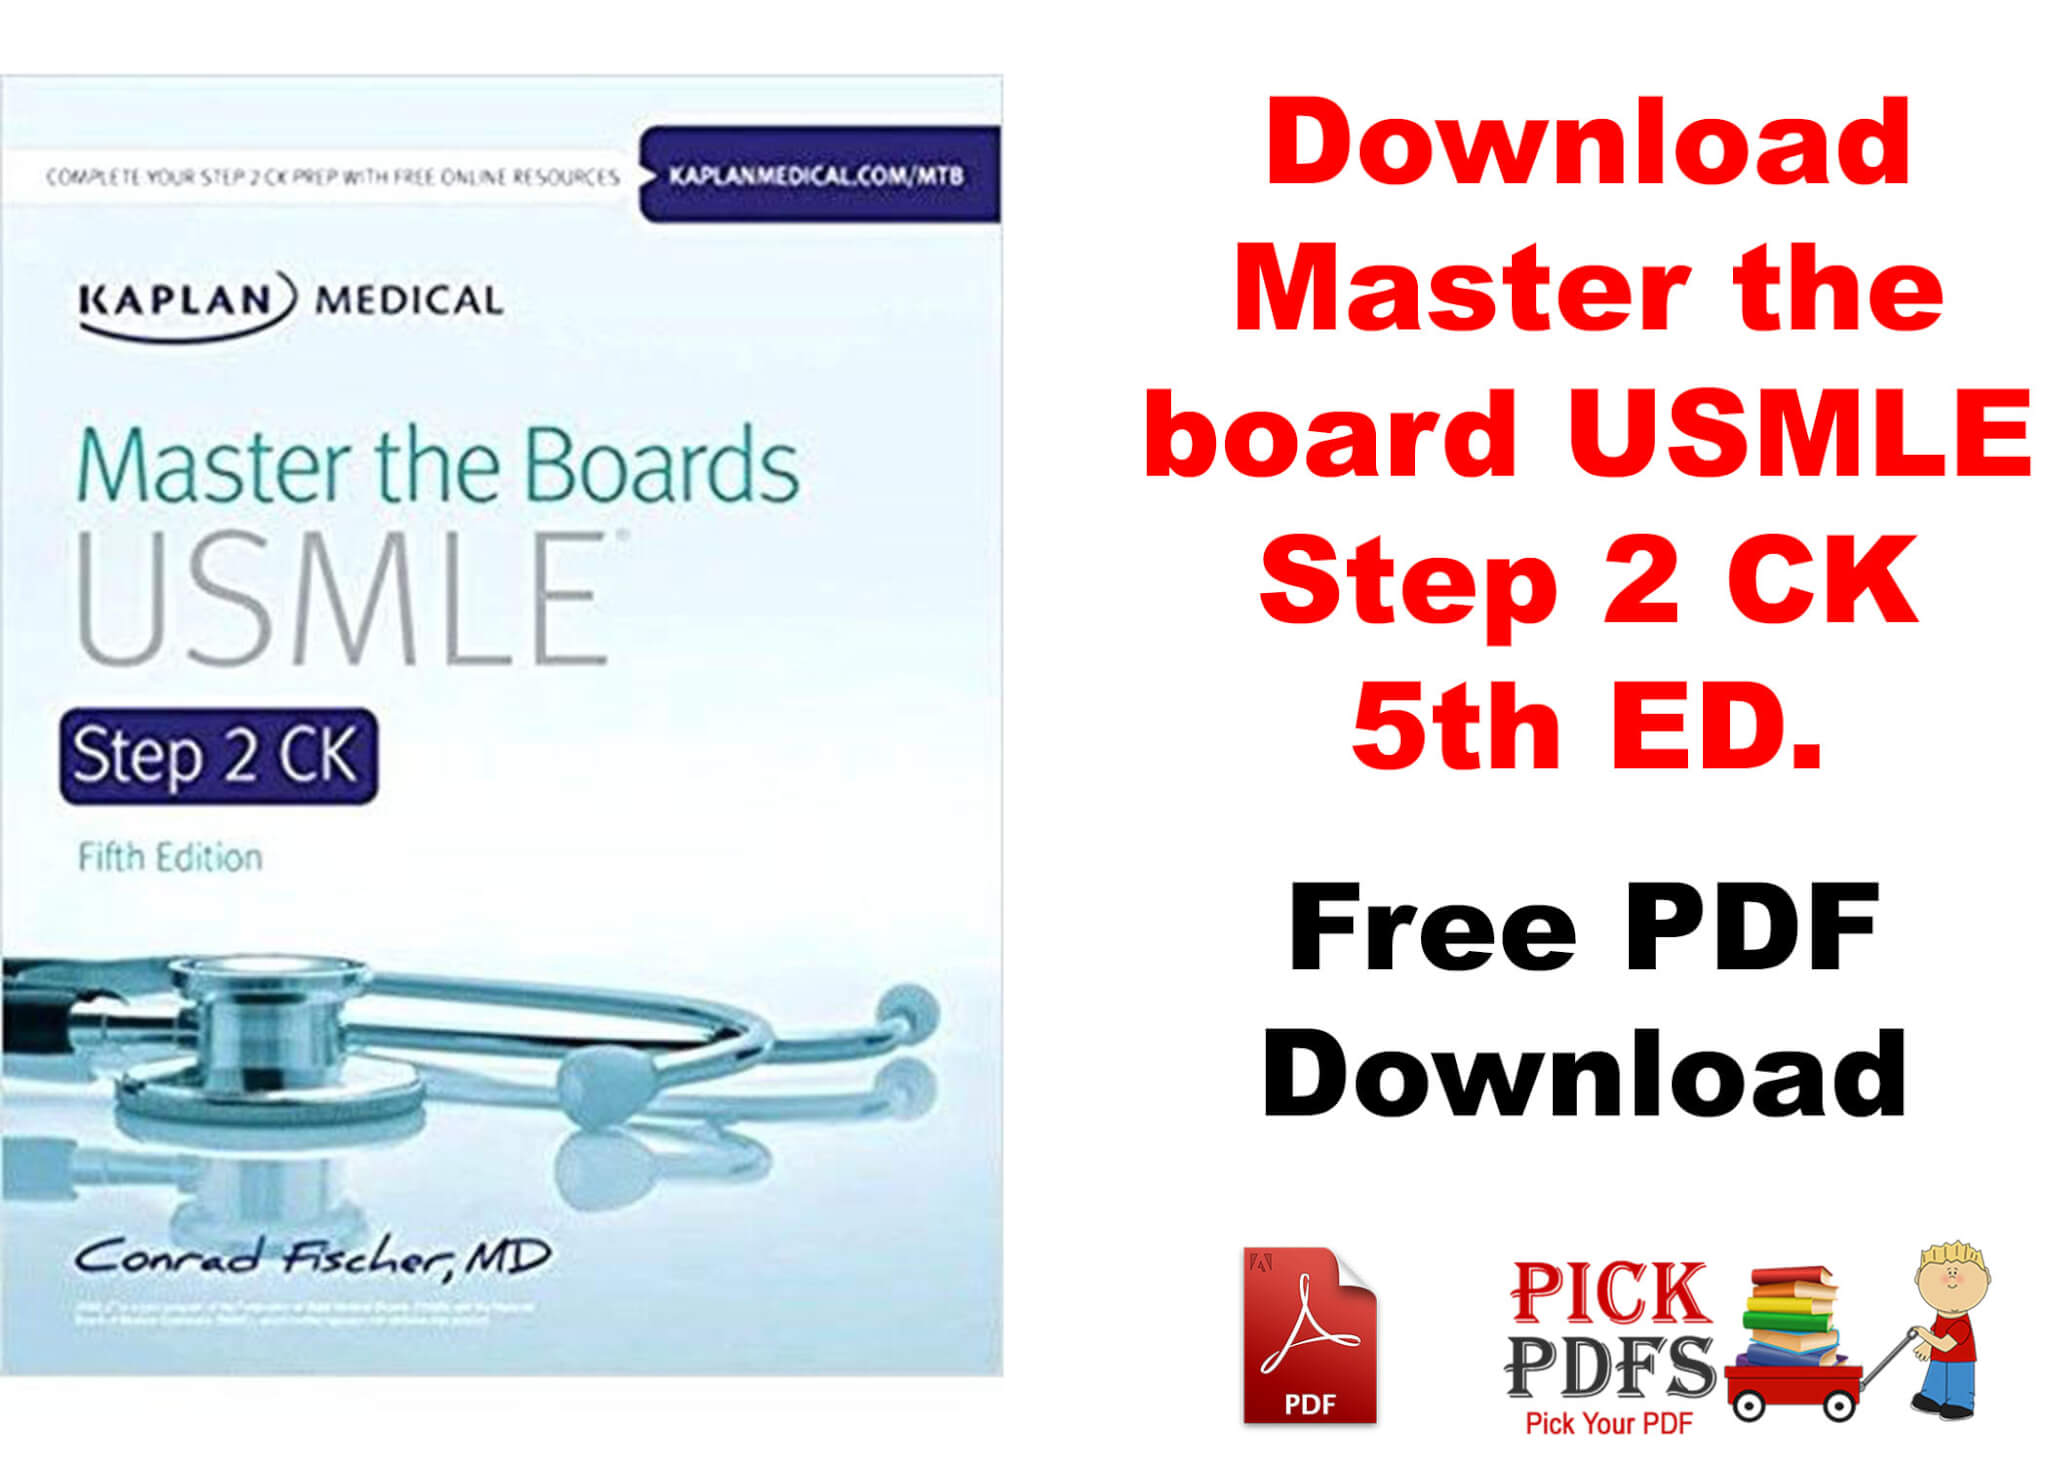 https://pickpdfs.com/hutchisons-clinical-methods-24th-edition-pdf/